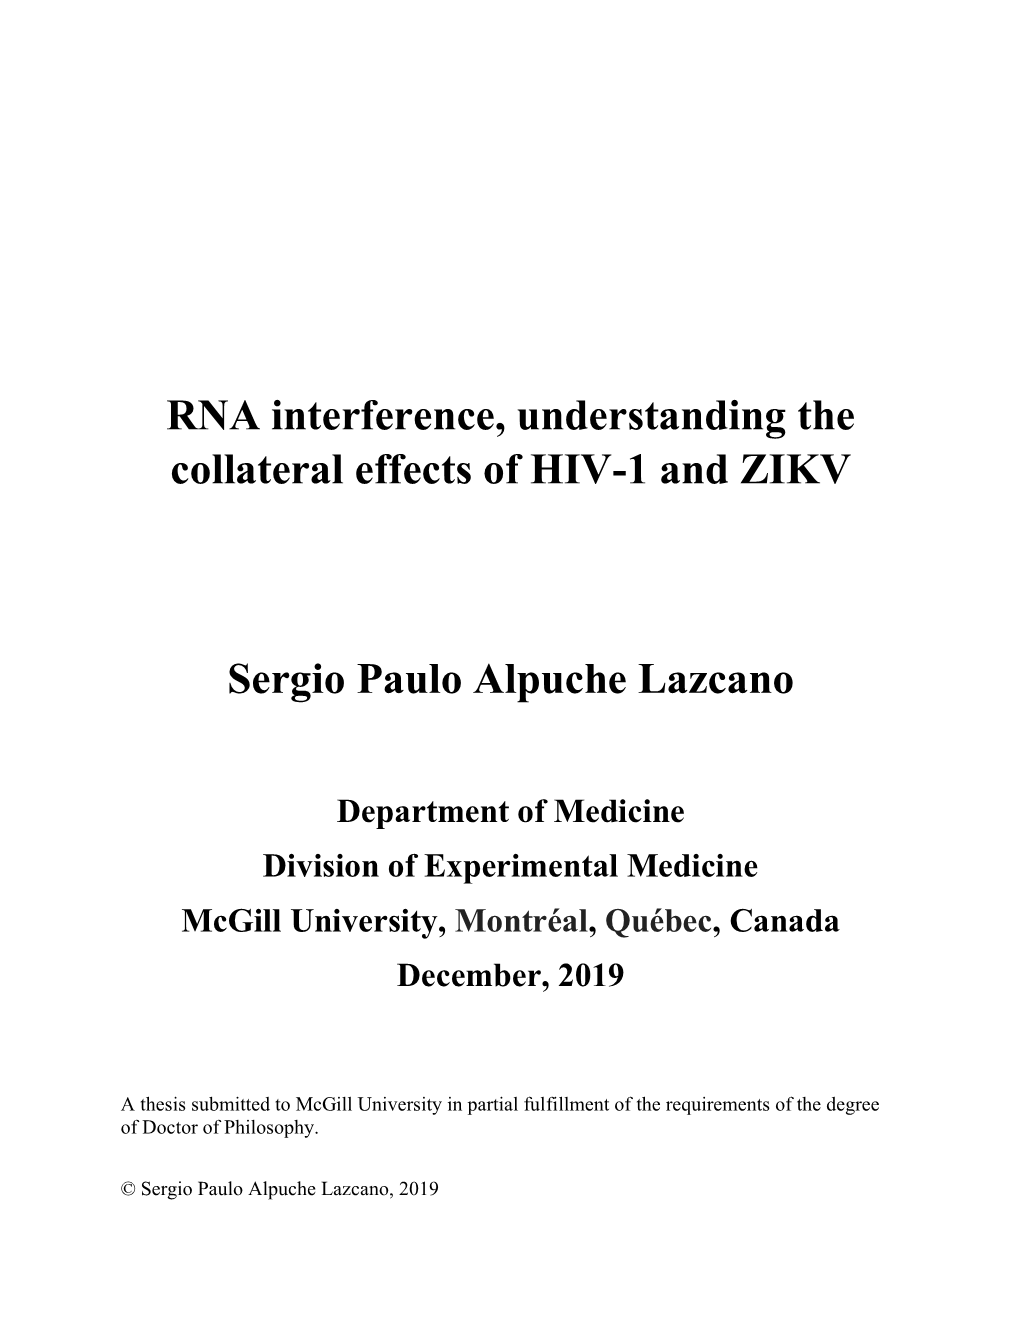 RNA Interference, Understanding the Collateral Effects of HIV-1 and ZIKV